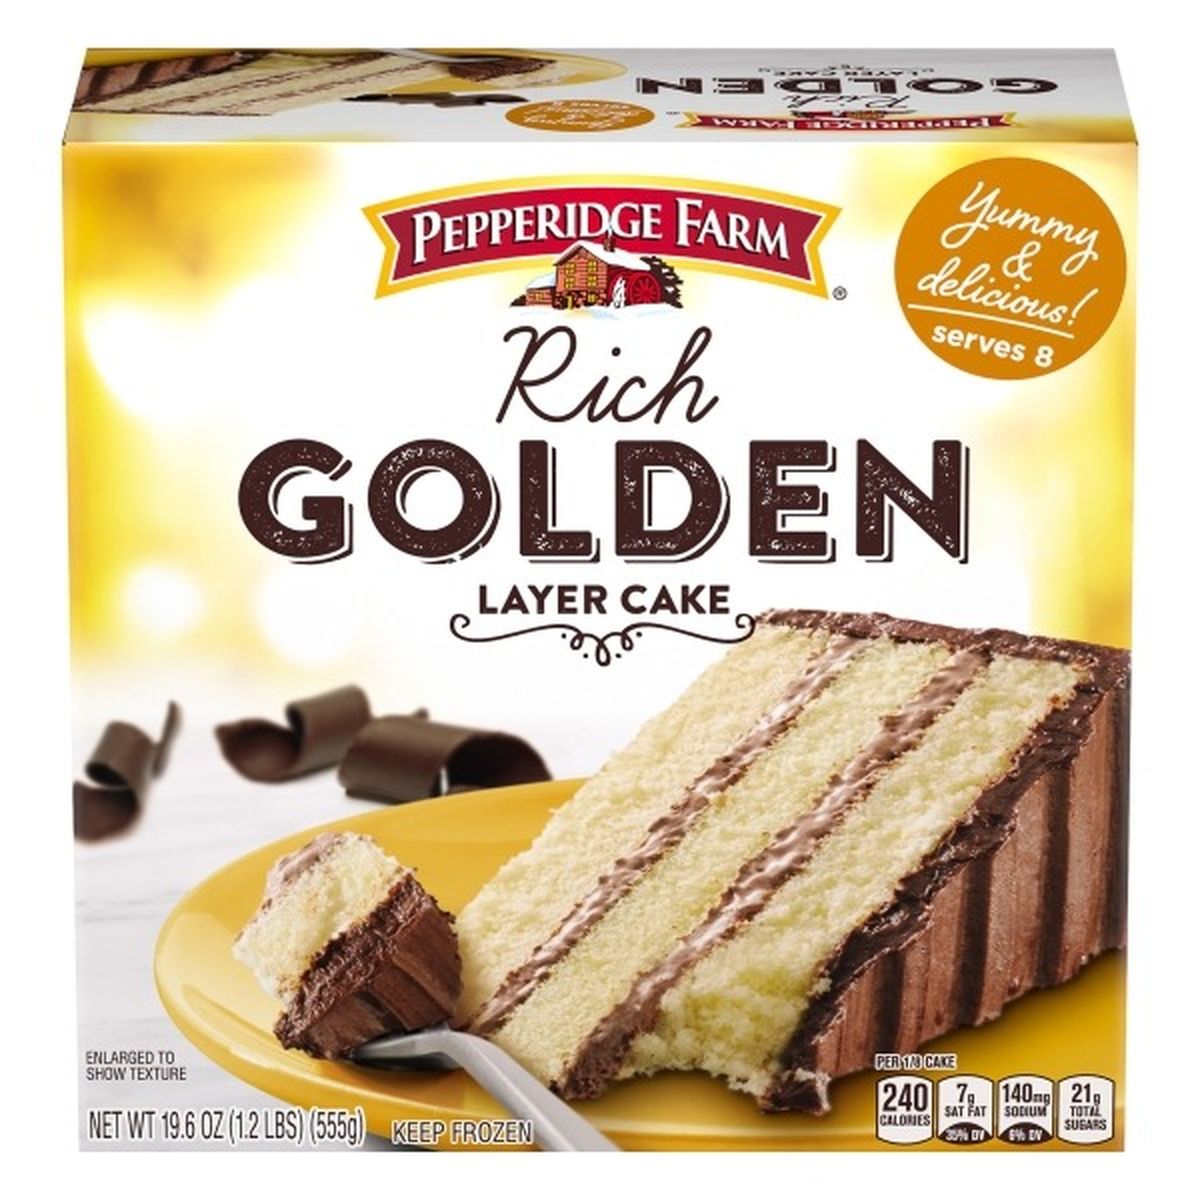 Calories in Pepperidge Farms  Layer Cake, Golden, Rich